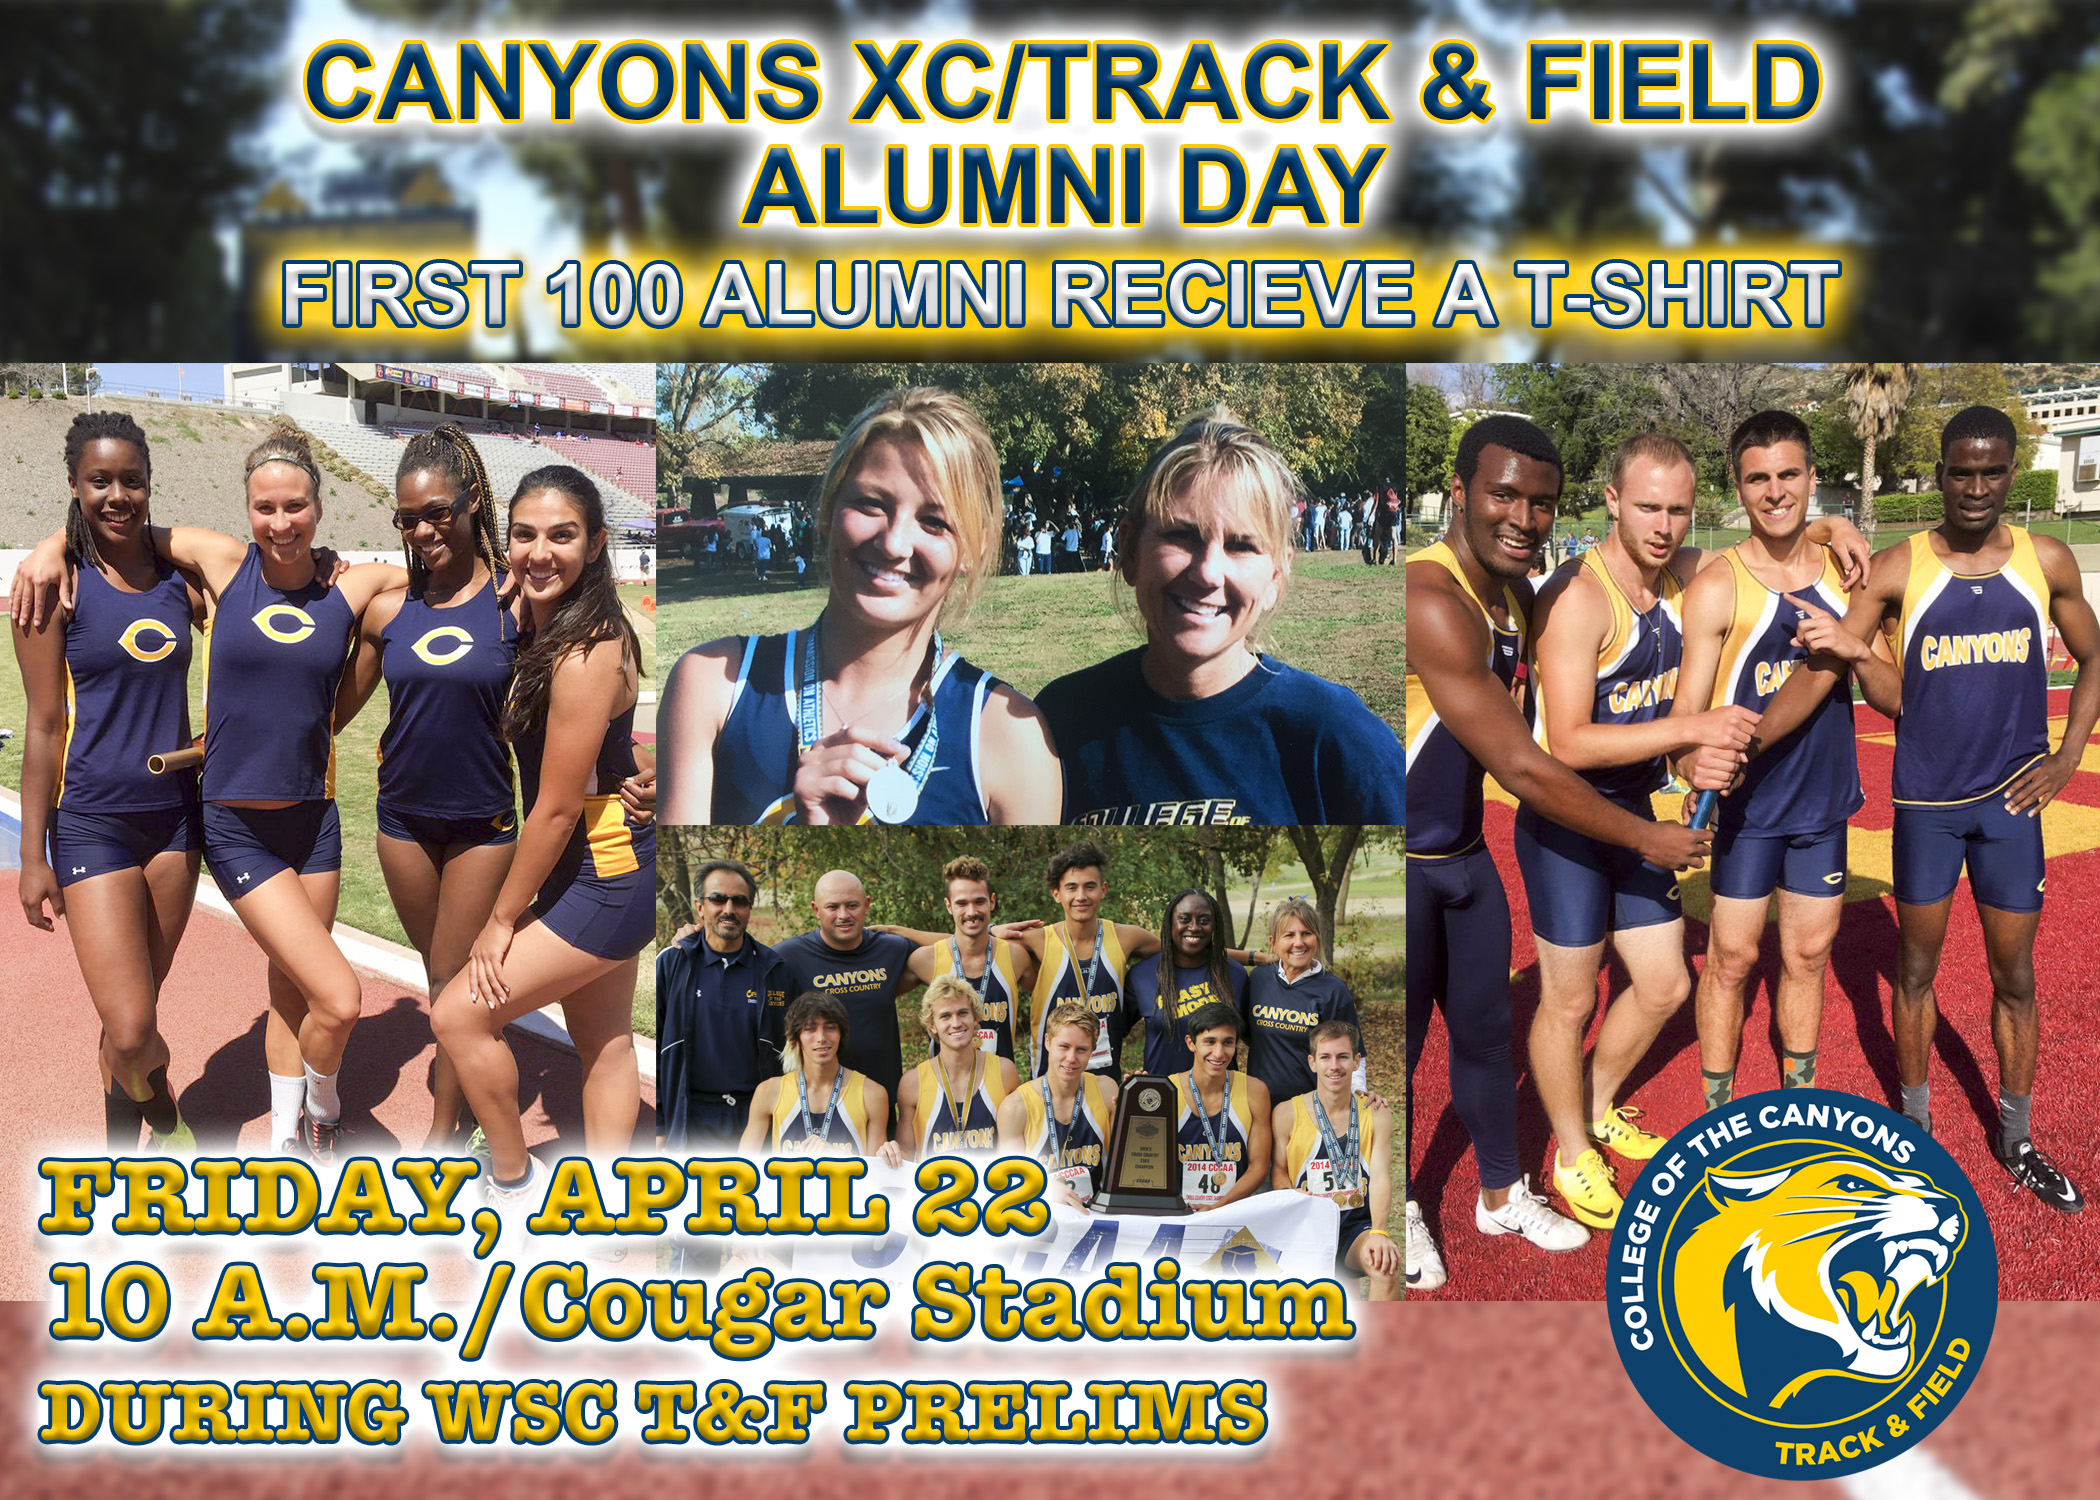 College of the Canyons XC/Track & Field Alumni Day information graphic.